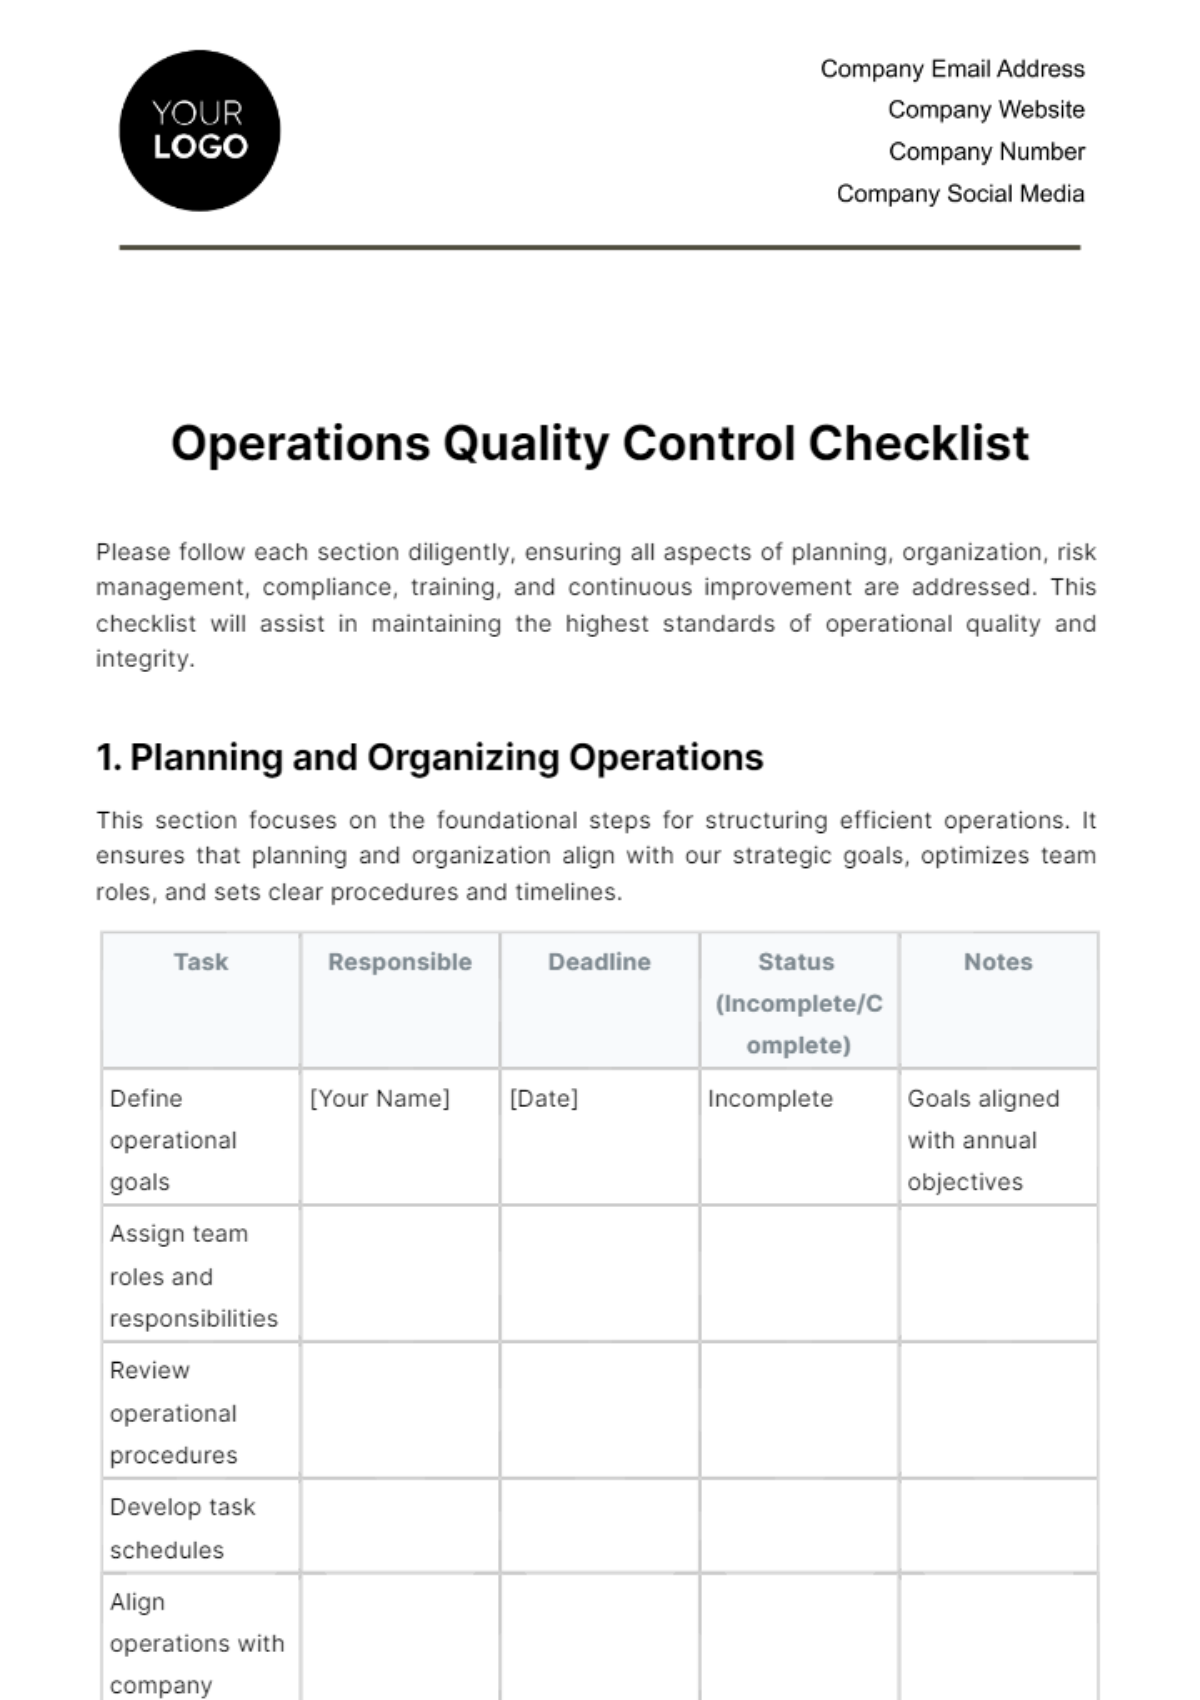 Operations Quality Control Checklist Template